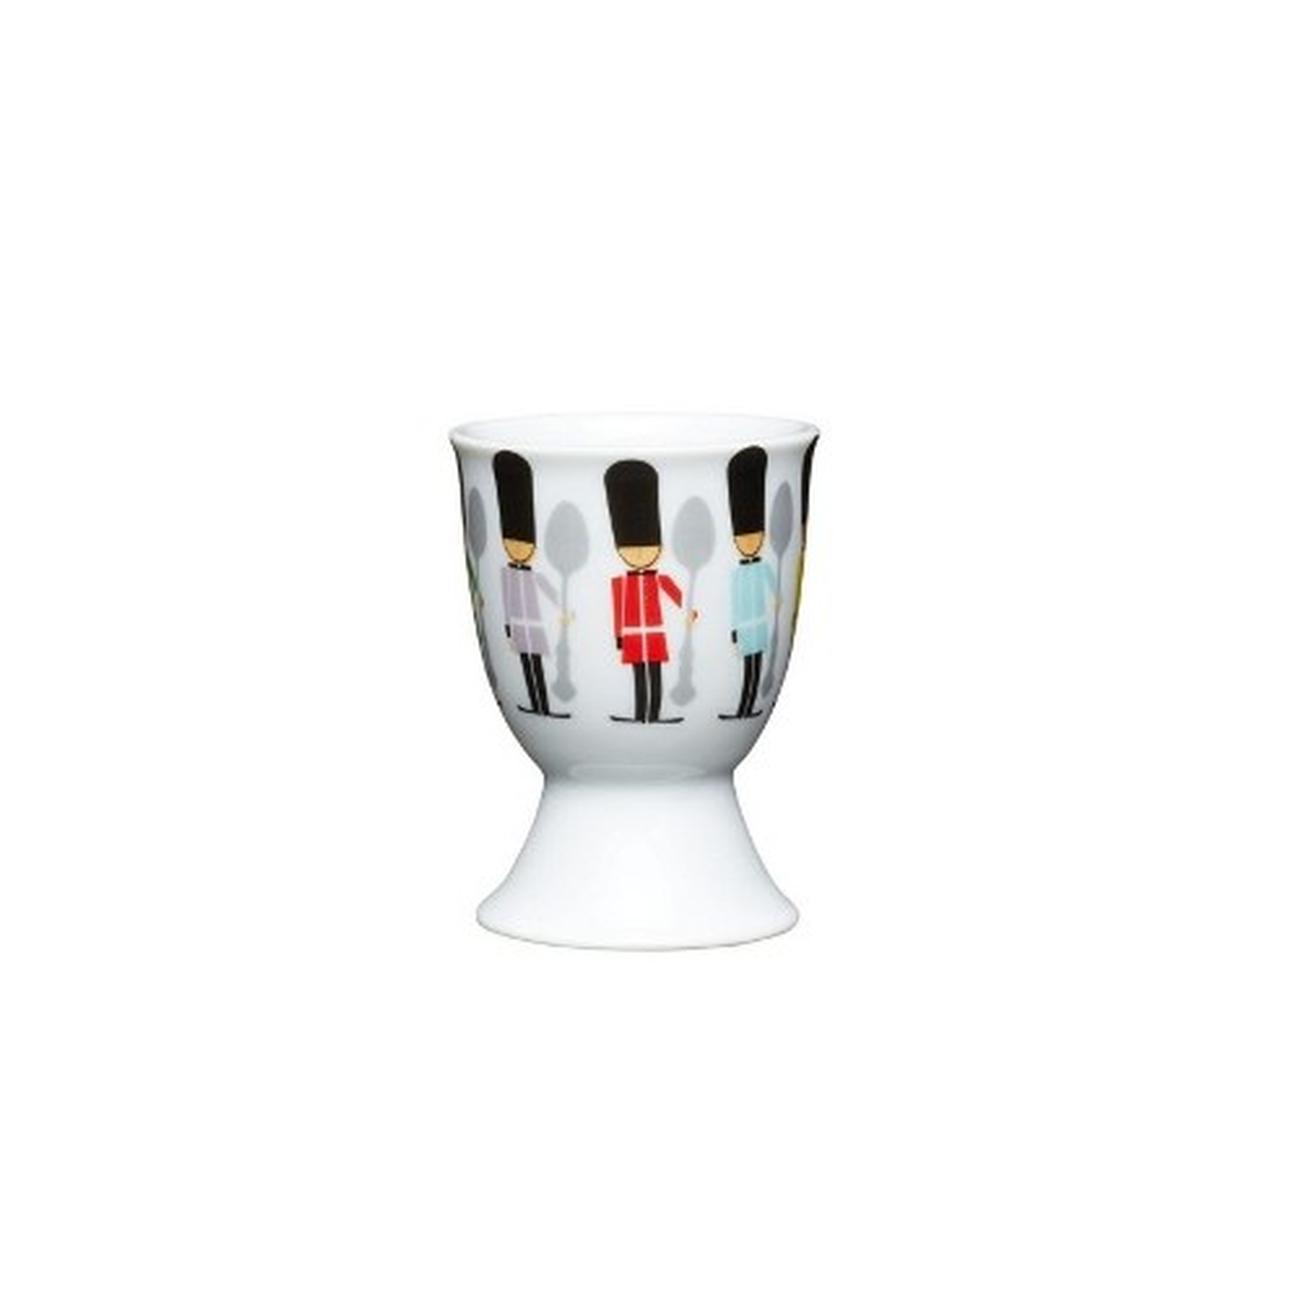 kc-soldiers-porcelain-egg-cup - KitchenCraft Children's Soldiers Porcelain Egg Cup